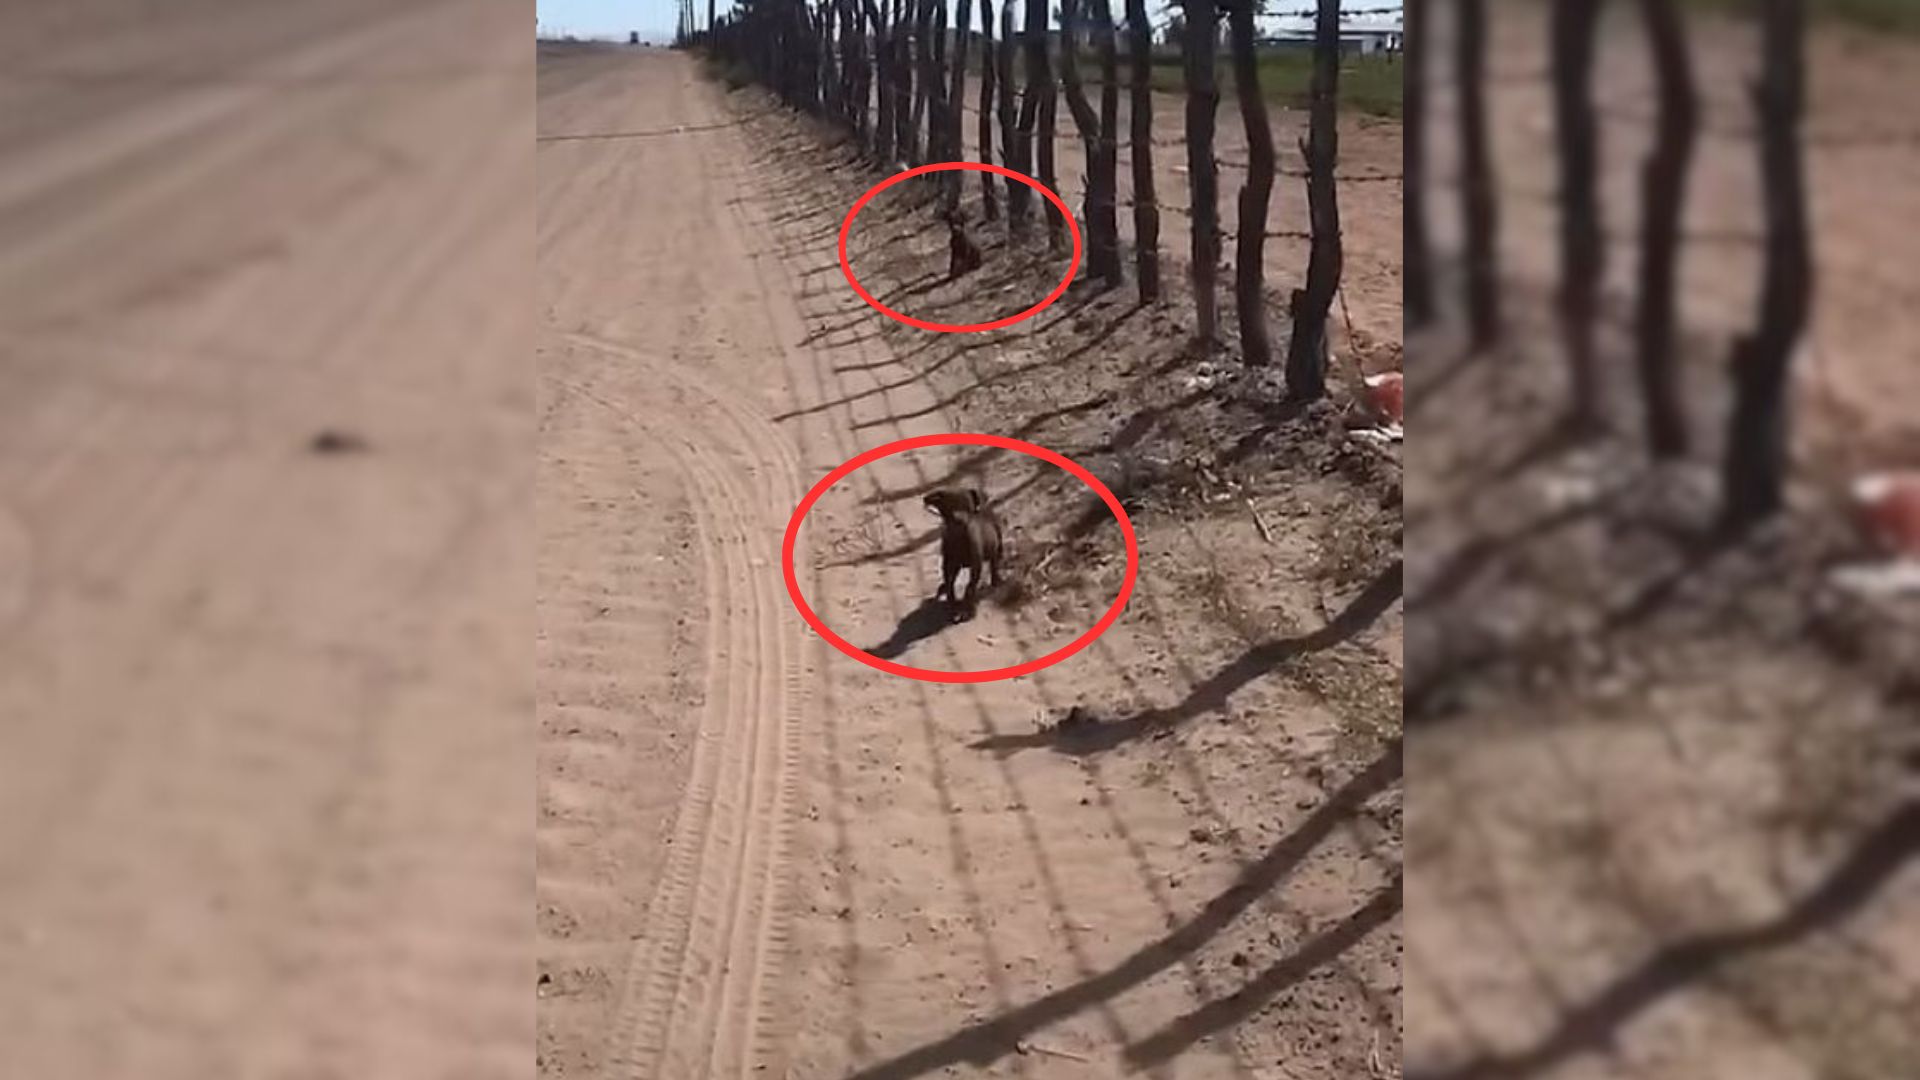 Filmmakers Noticed 2 Small Puppies In The Middle Of A Desert So They Decided To Help